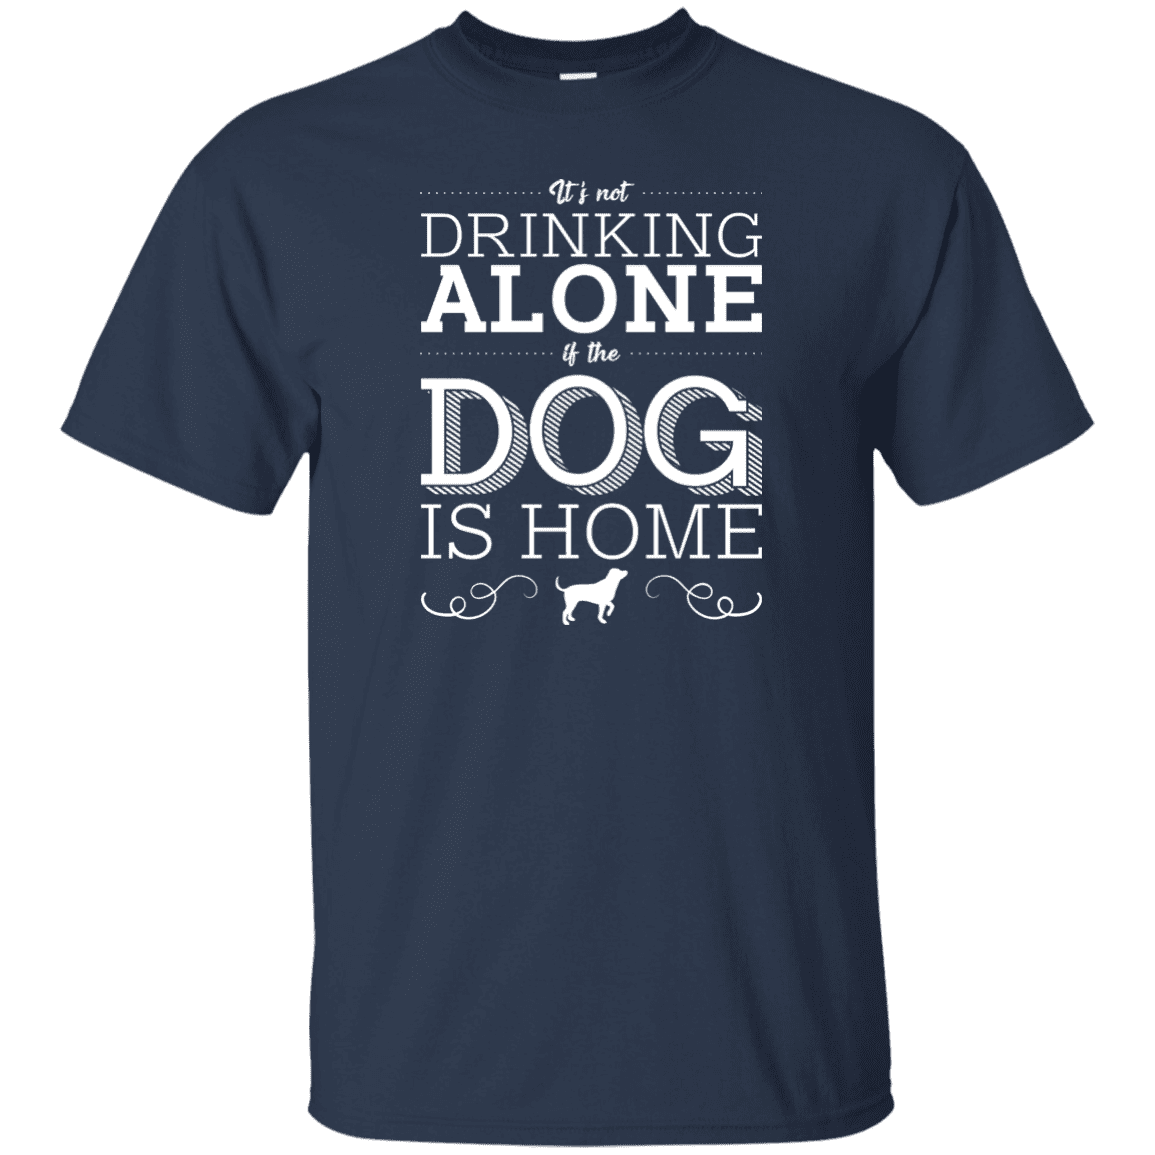 It's Not Drinking Alone - T Shirt.